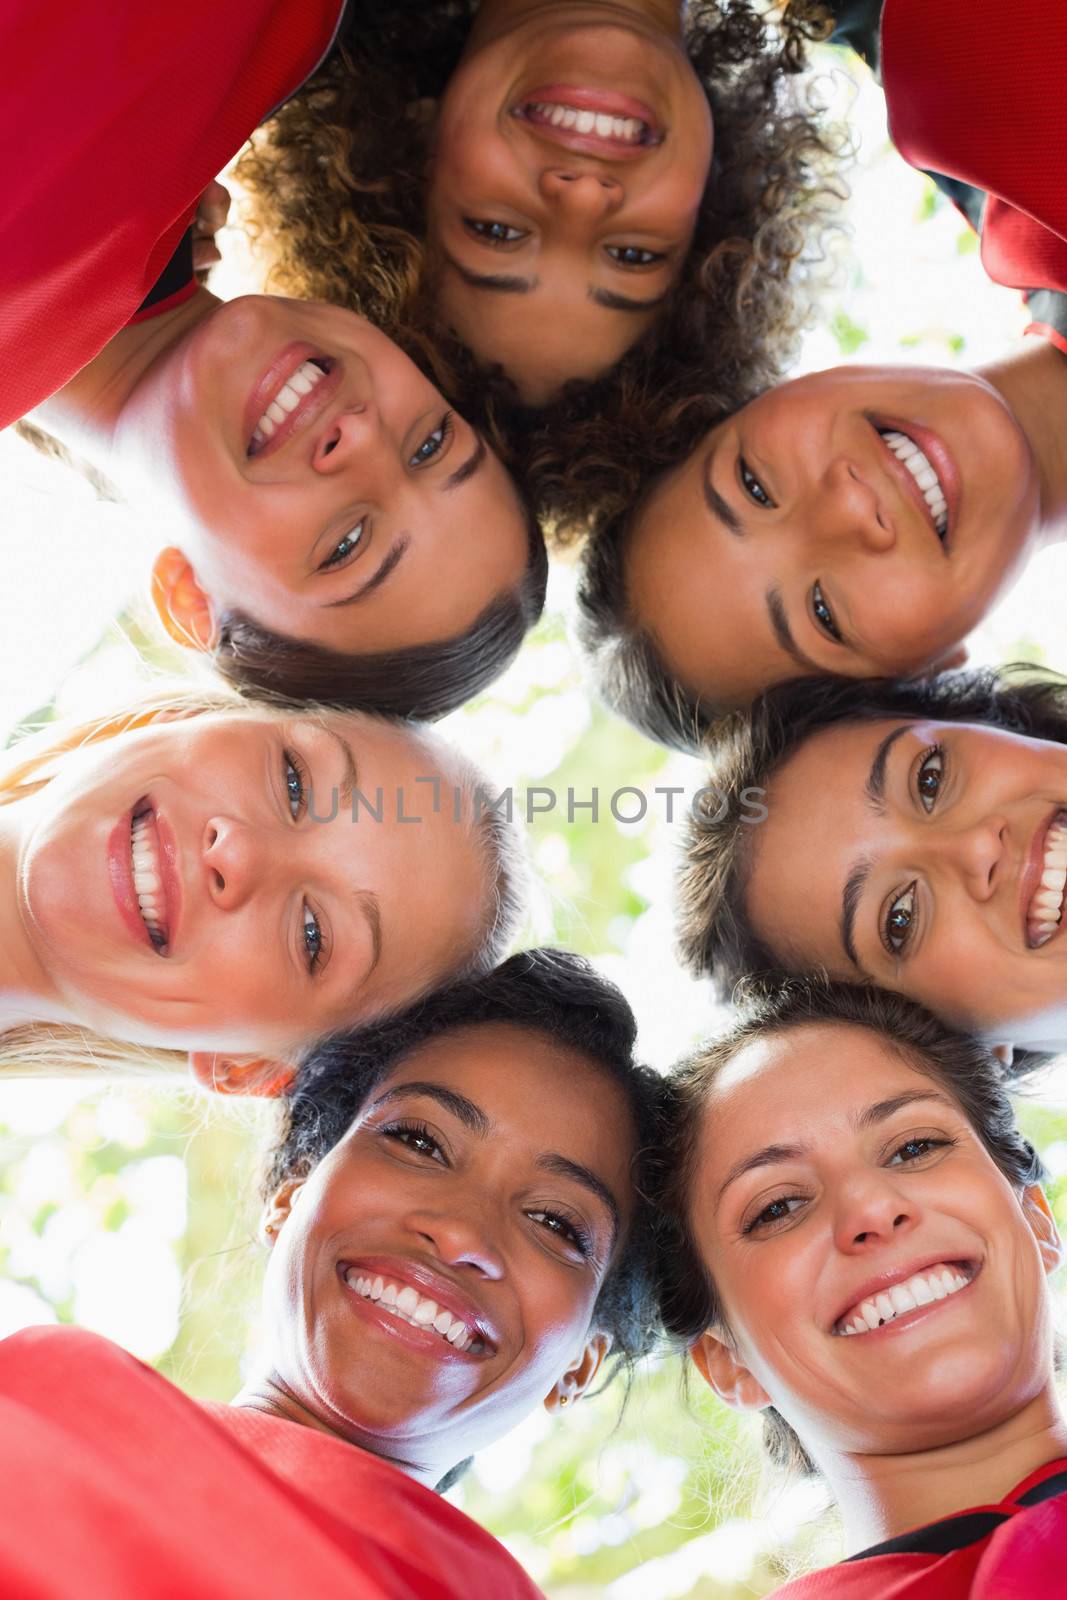 Directly below shot of happy female soccer team forming huddle